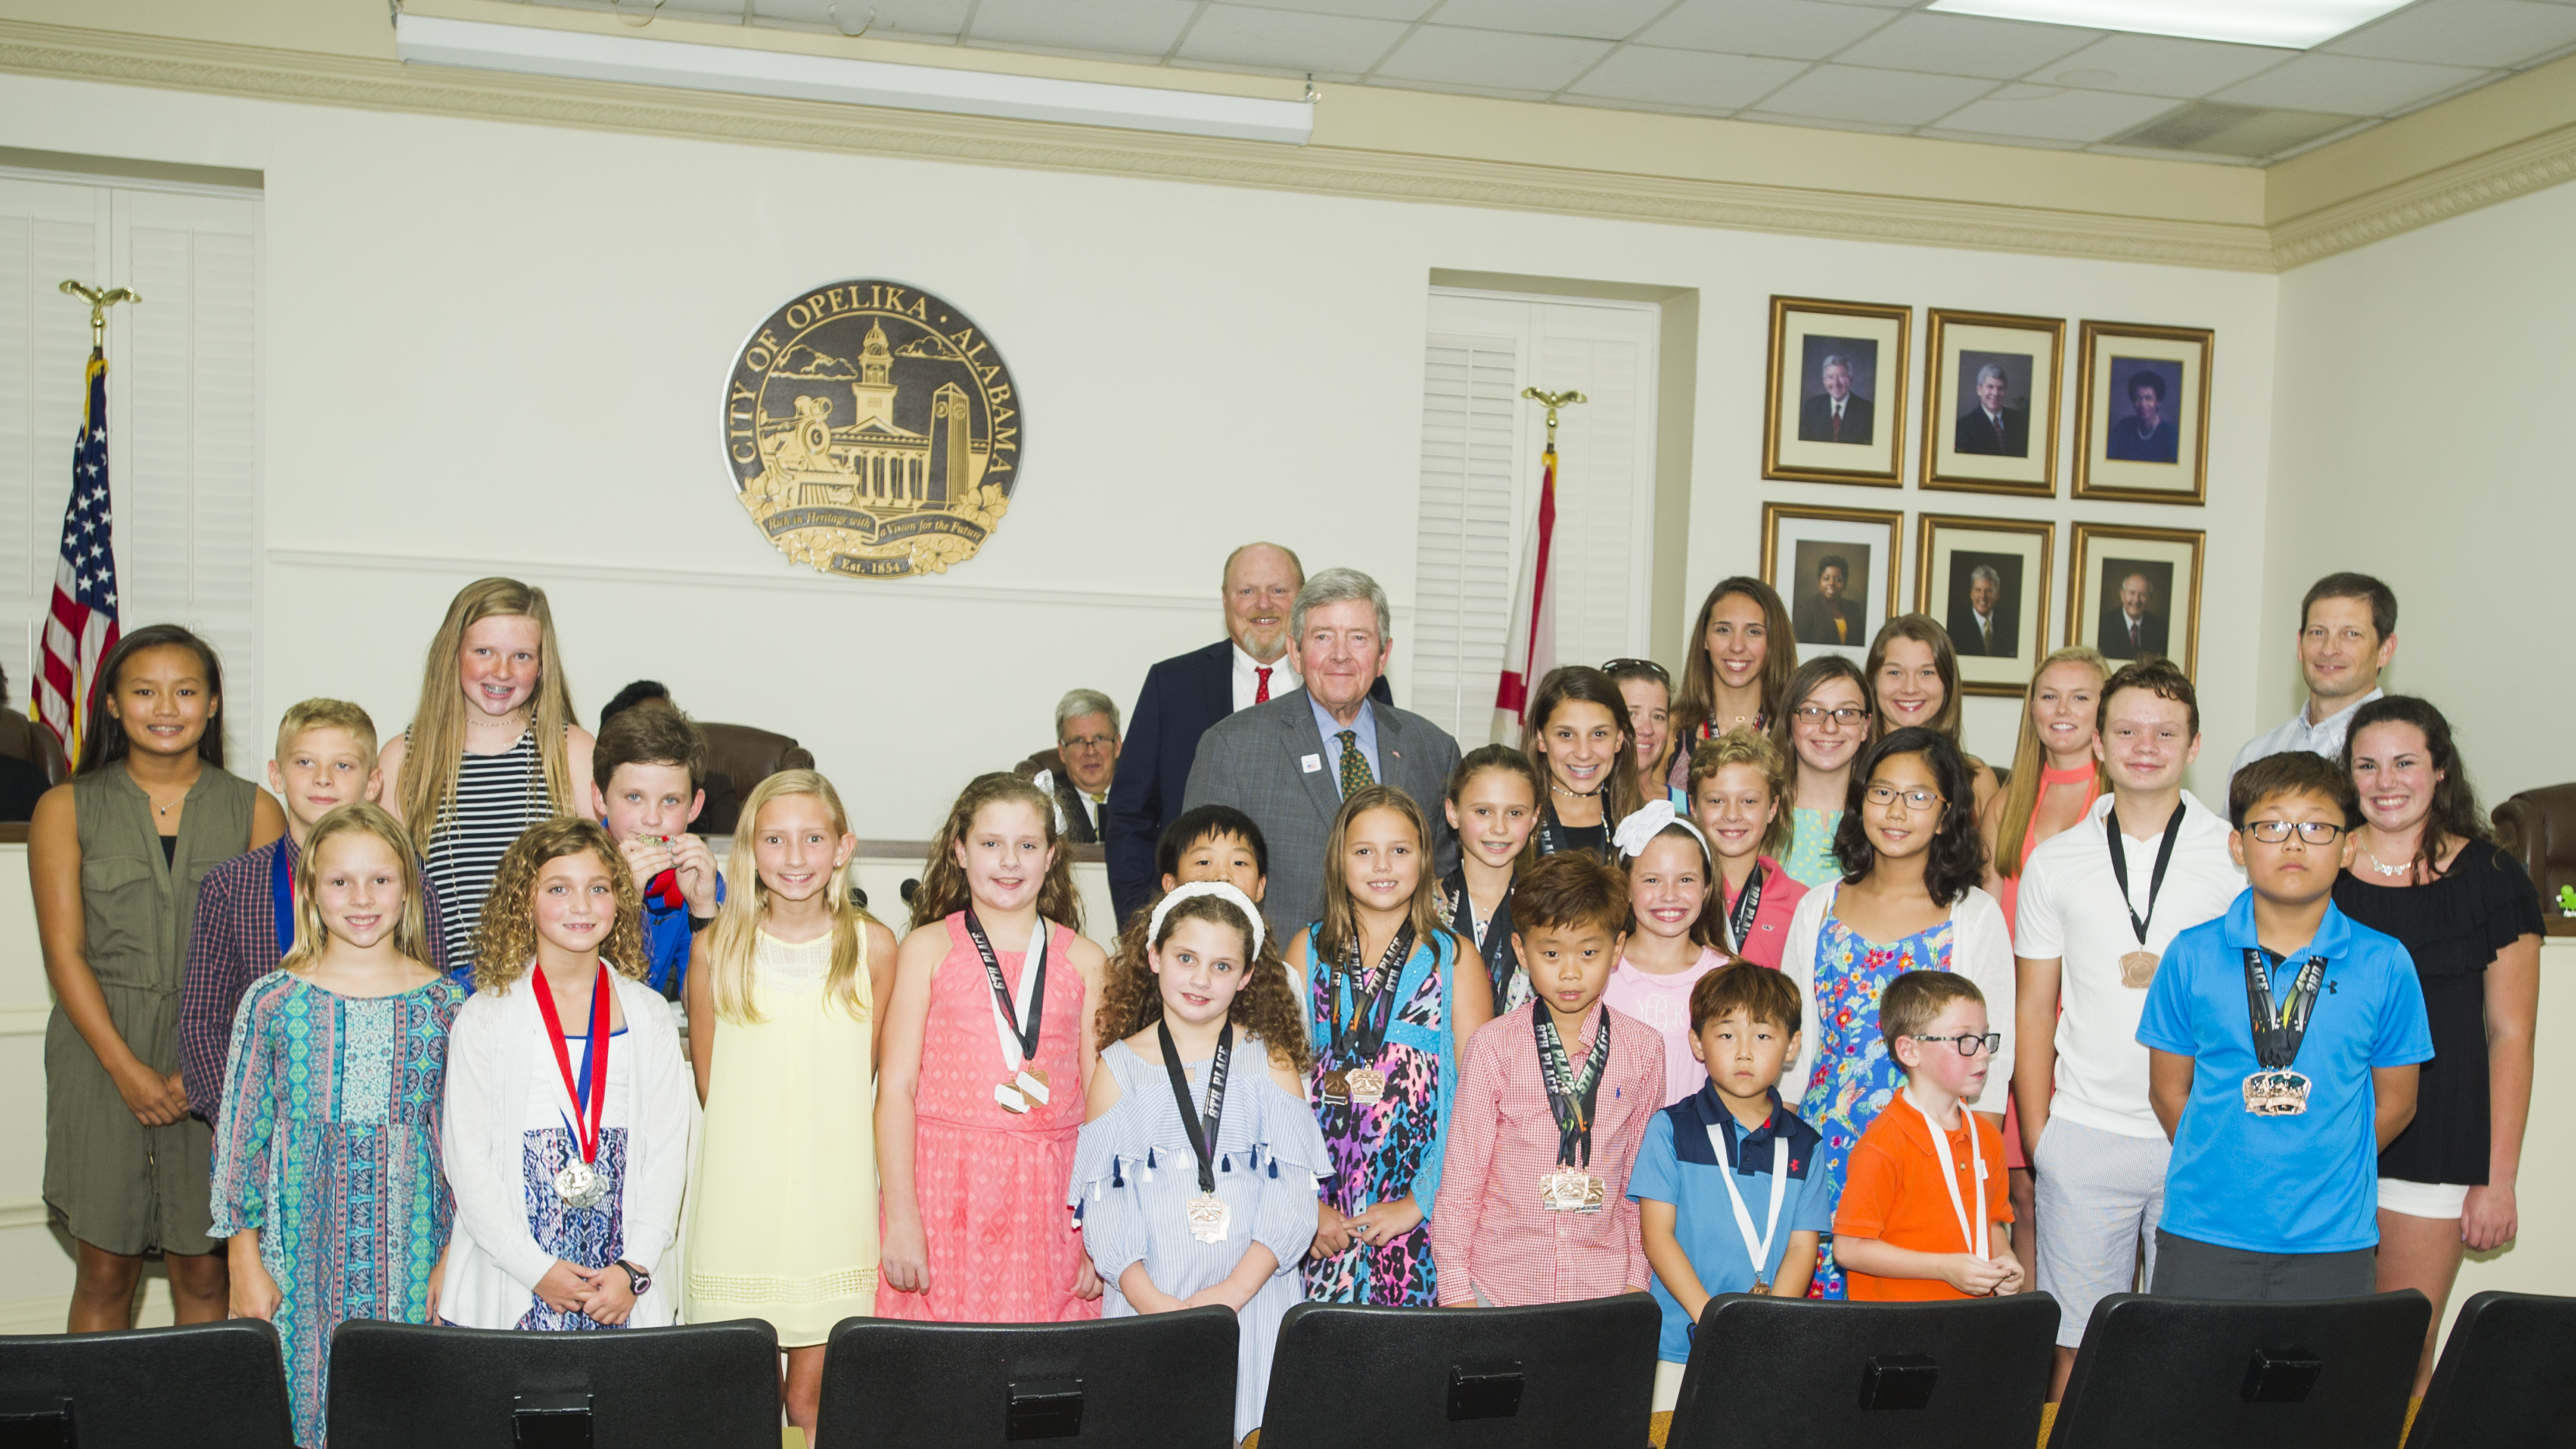 Opelika City Council recognizes Opelika Swim Team at Tuesday meeting